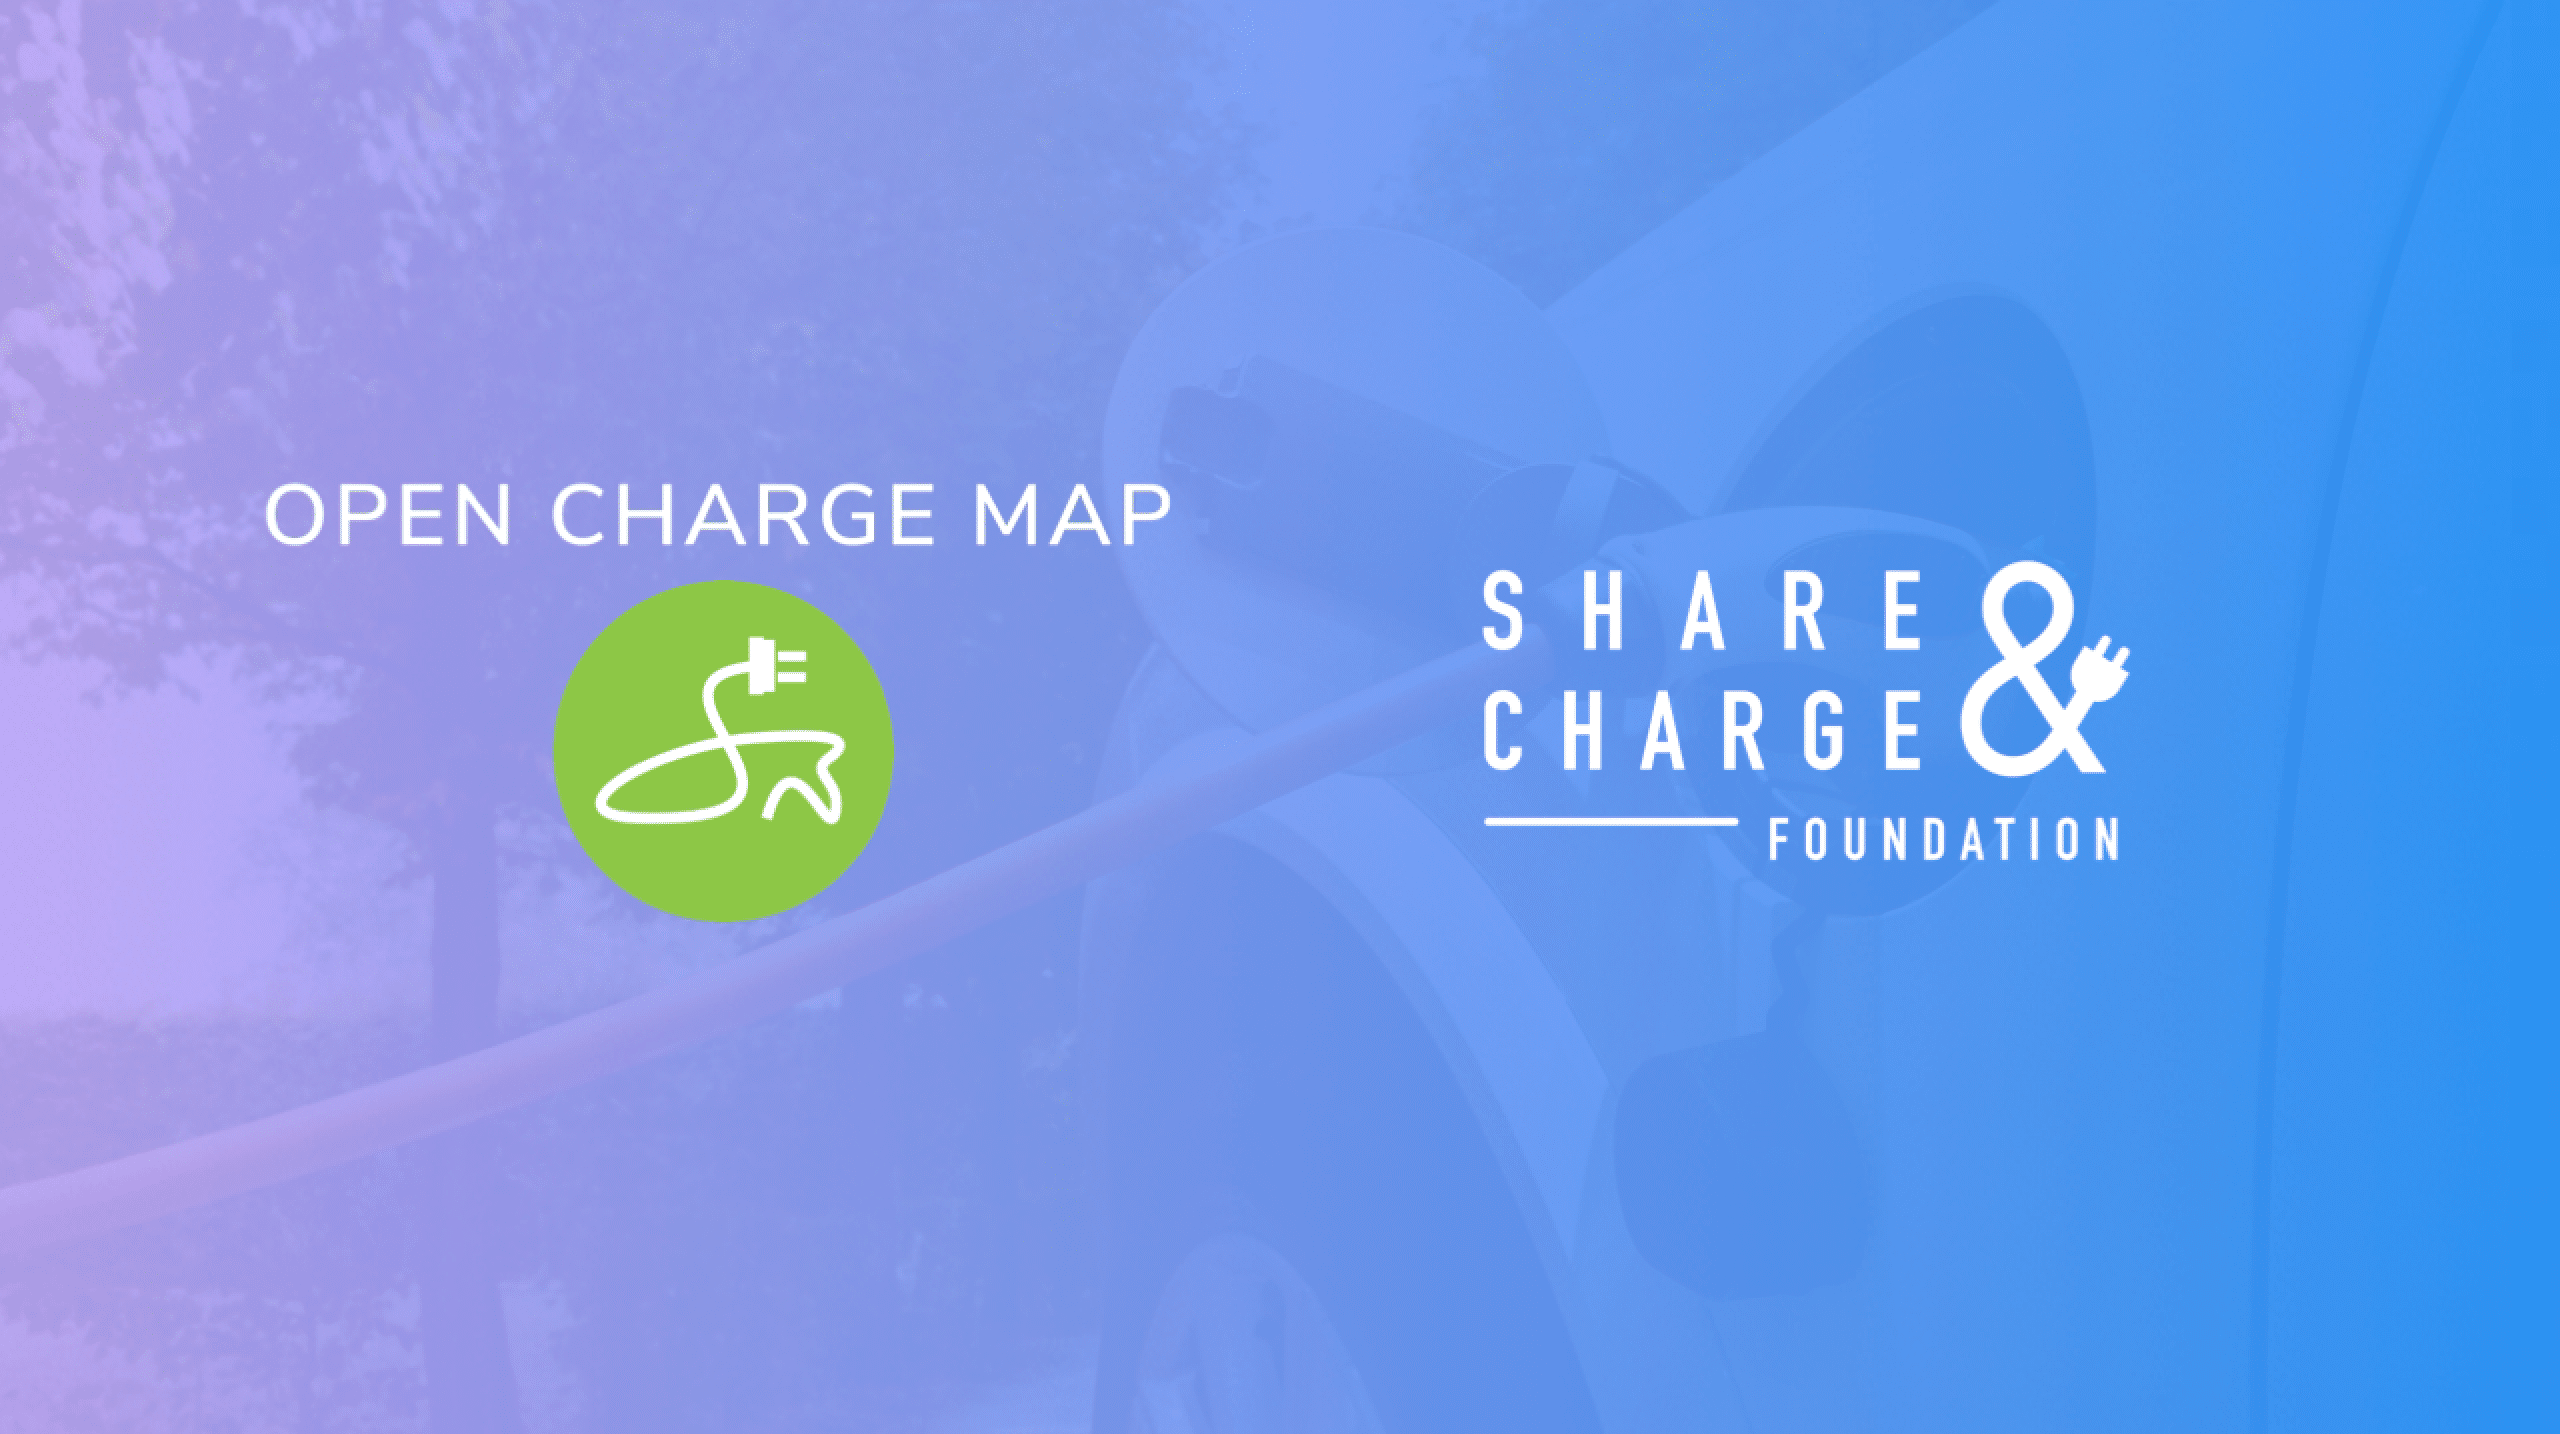 Open Charge Map